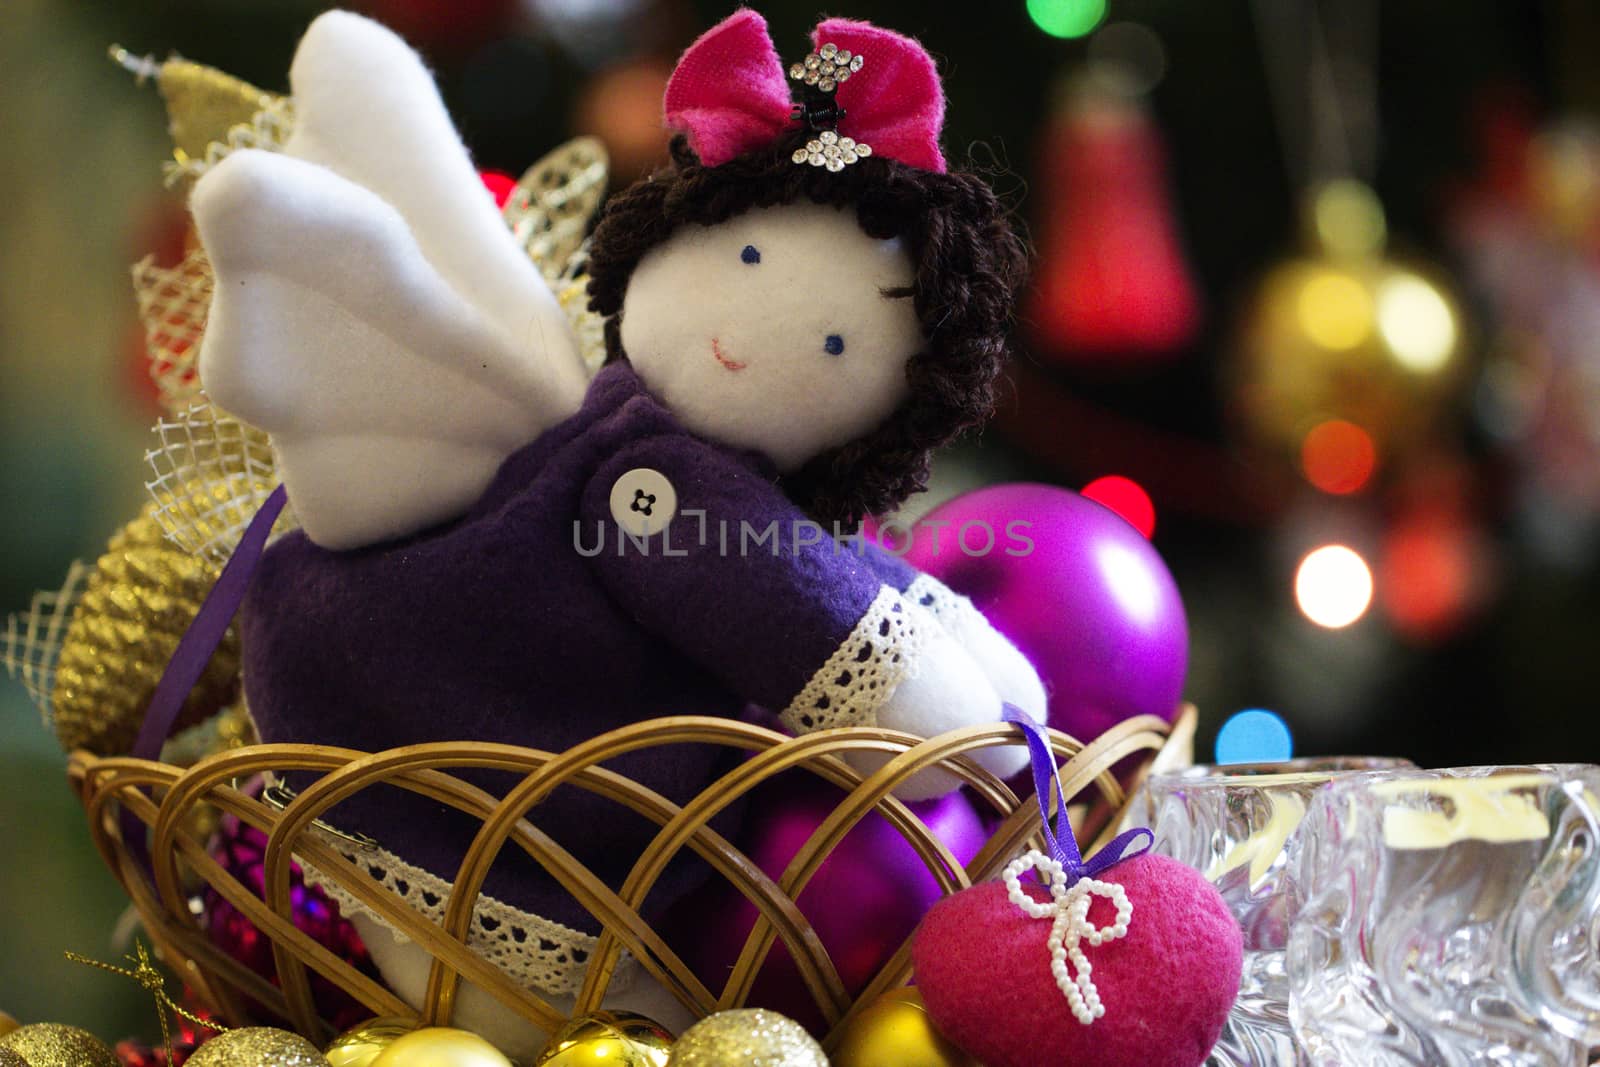 A natural cotton soft toy angel that brings a heart, peaceful handmade soft toy.Christmas decoration handmade toy Angel.